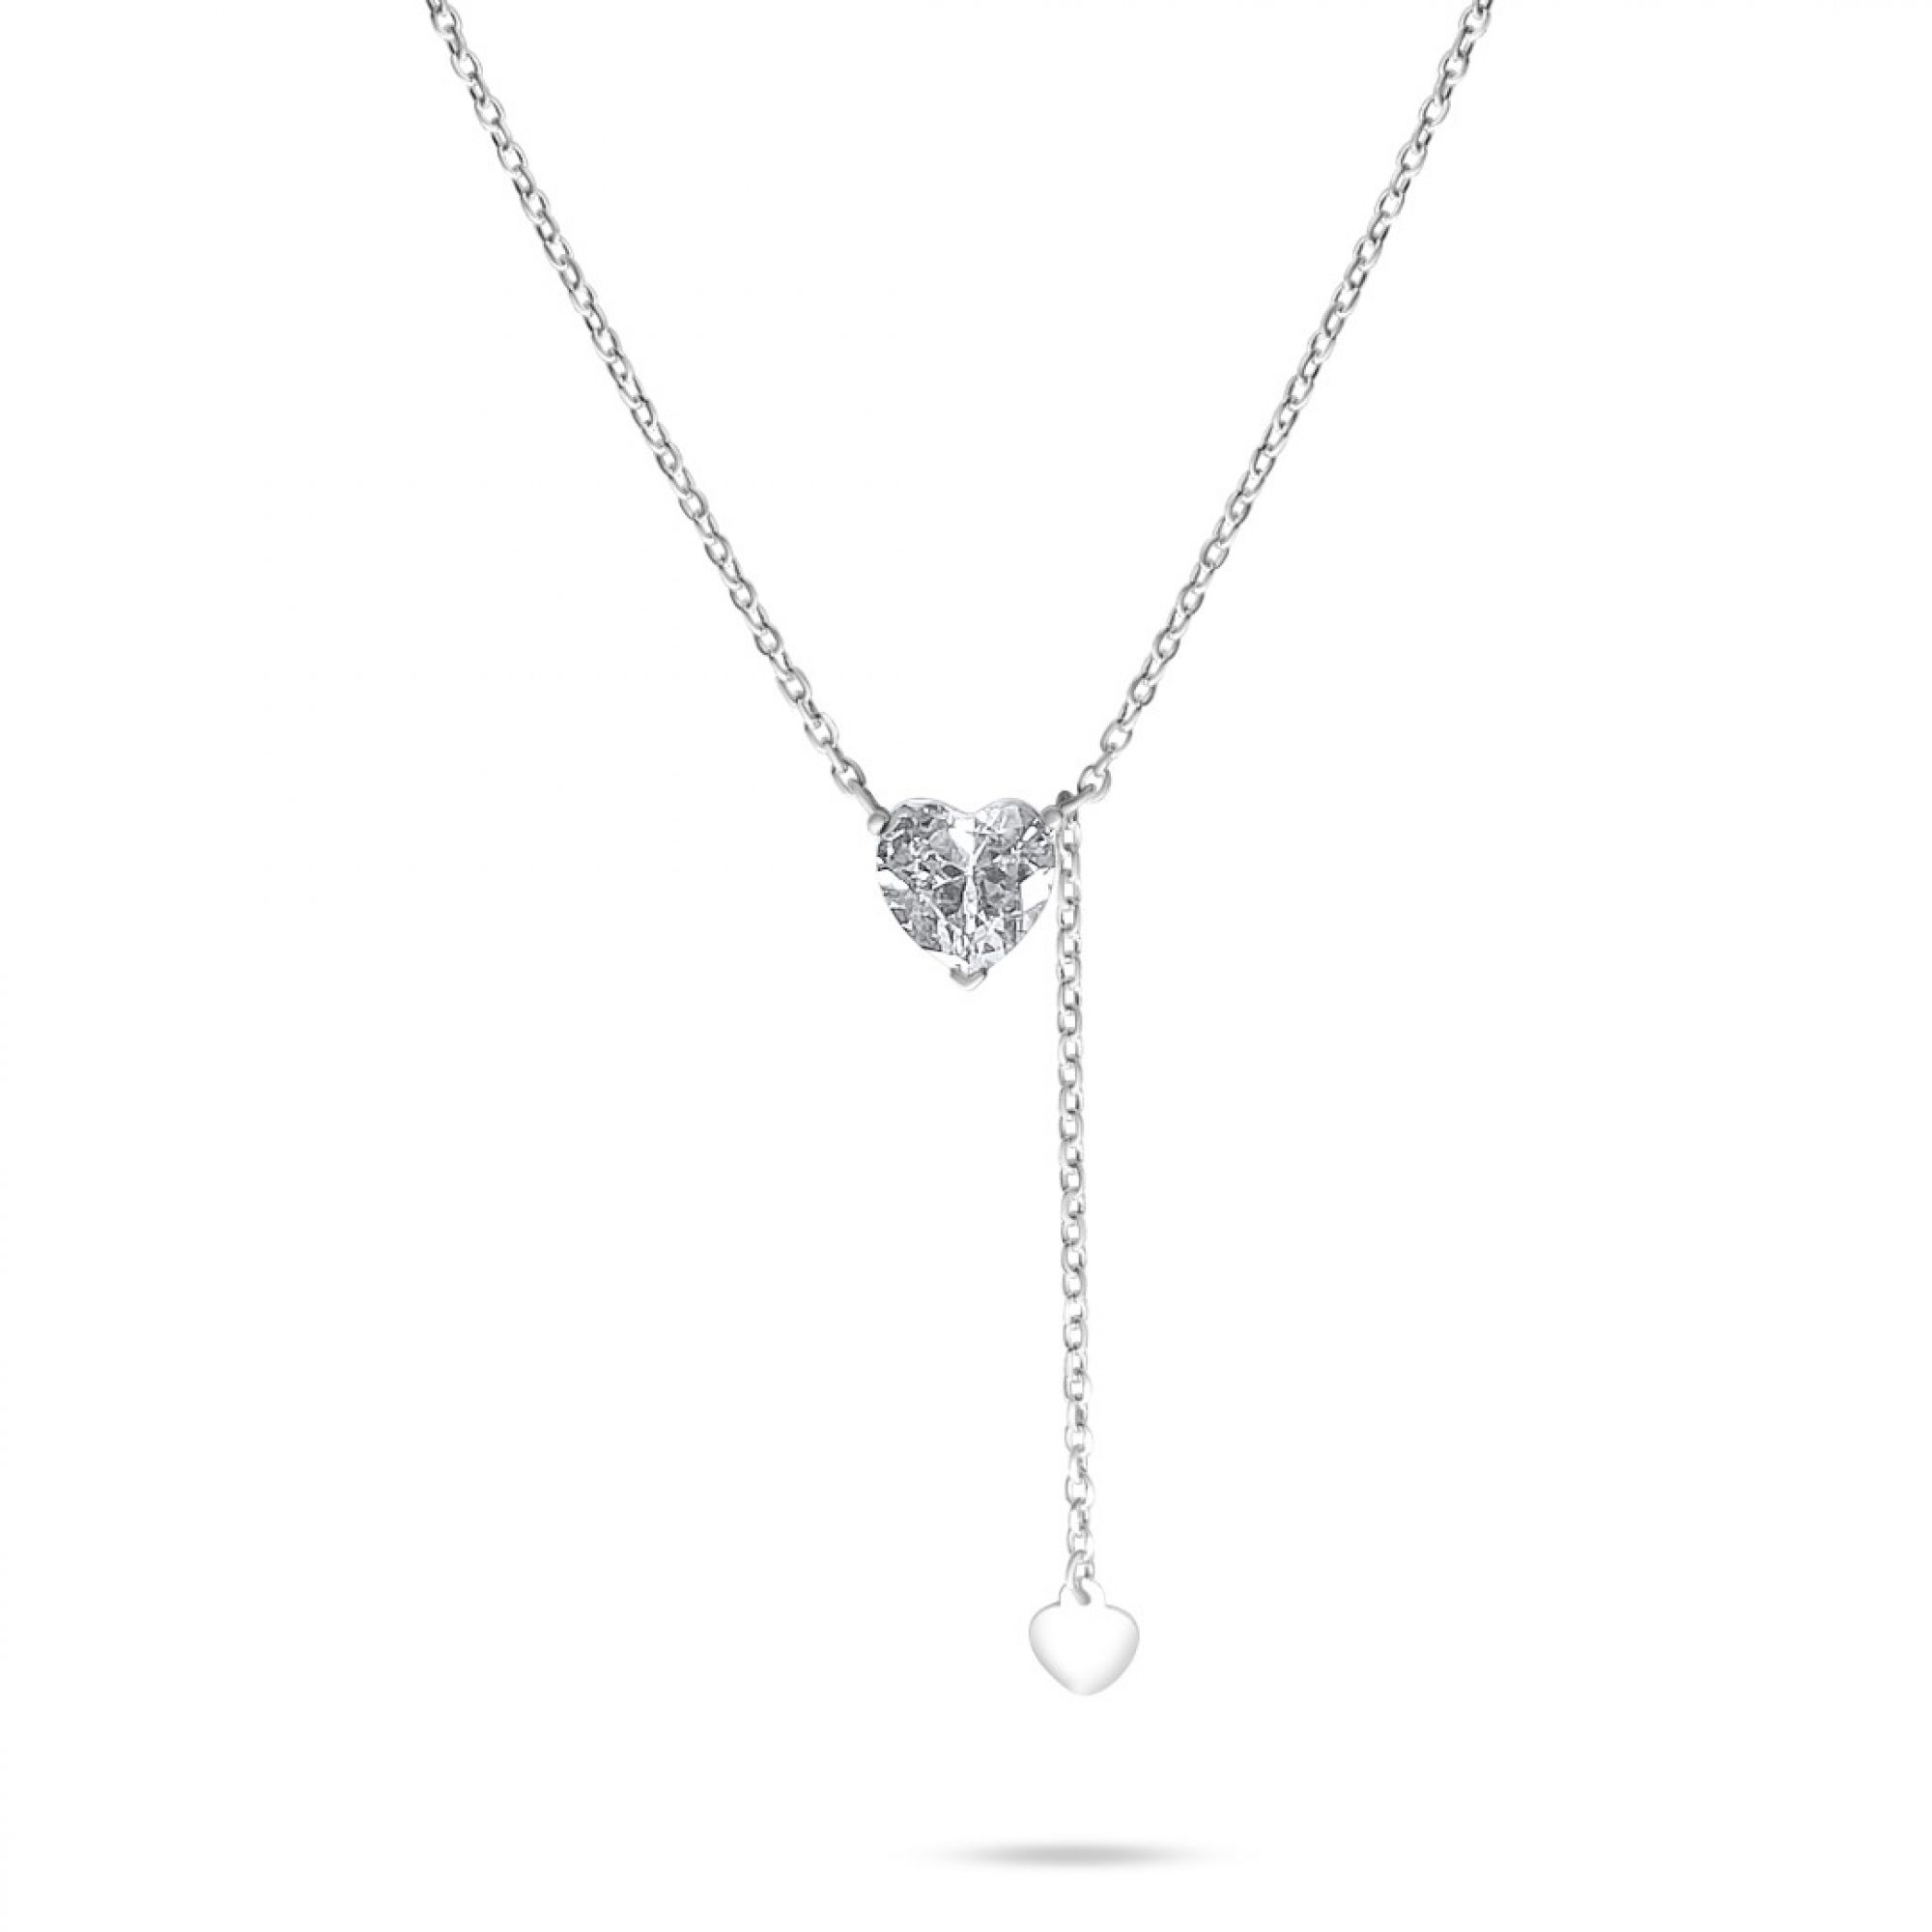 Heart necklace with zircon stone